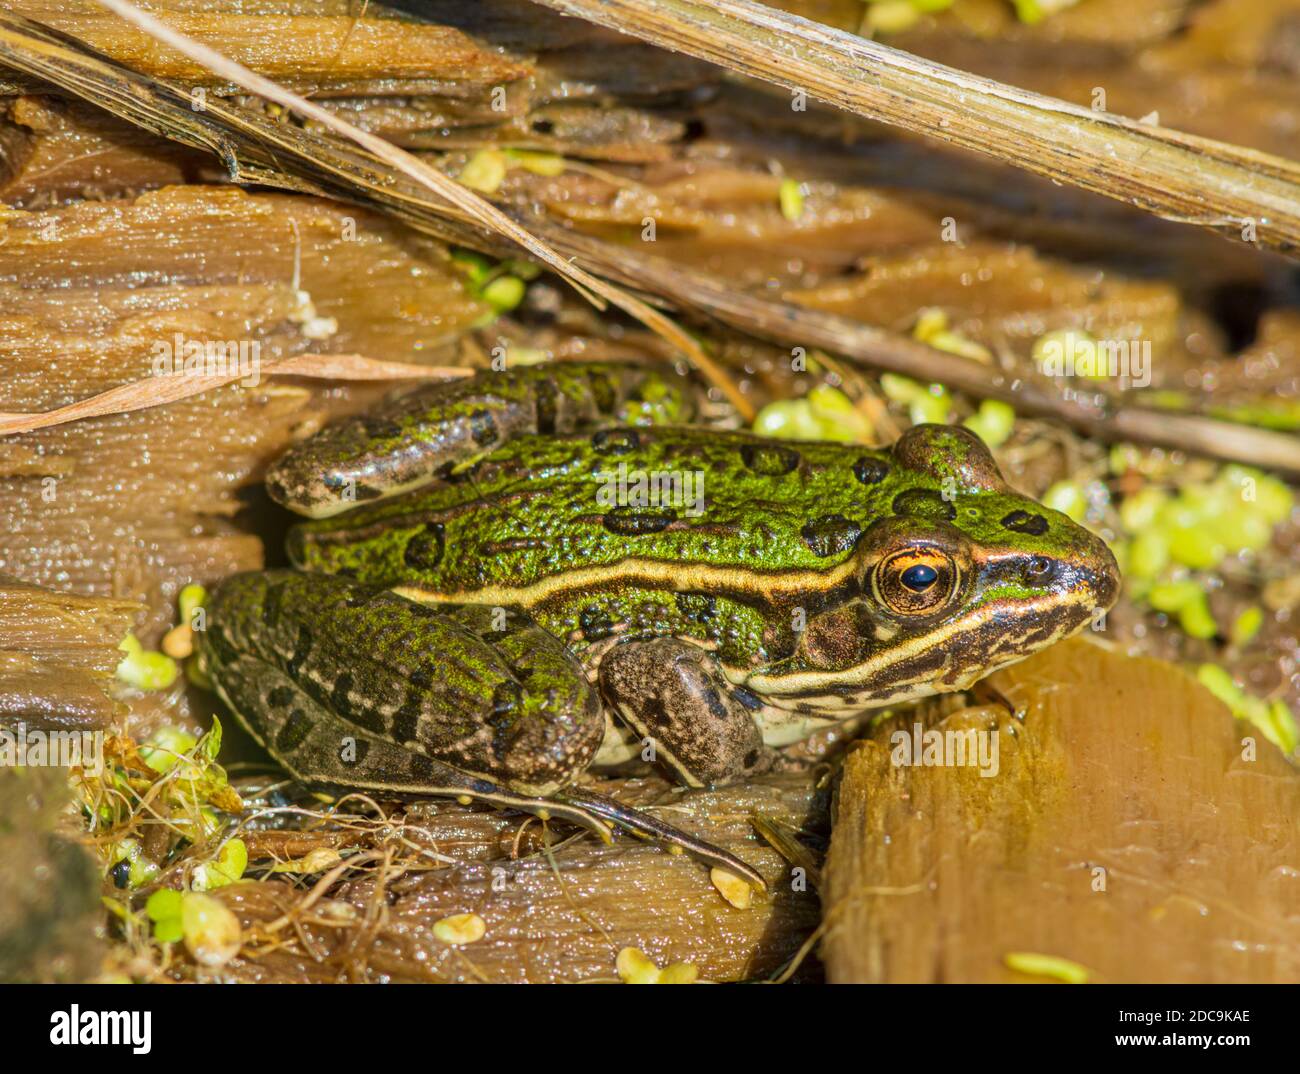 Young Northern Leopard frog (Lithobates/ Rana pipiens) resting among shoreline of wetlands pond, Castle Rock Colorado USA. Photo taken in August. Stock Photo